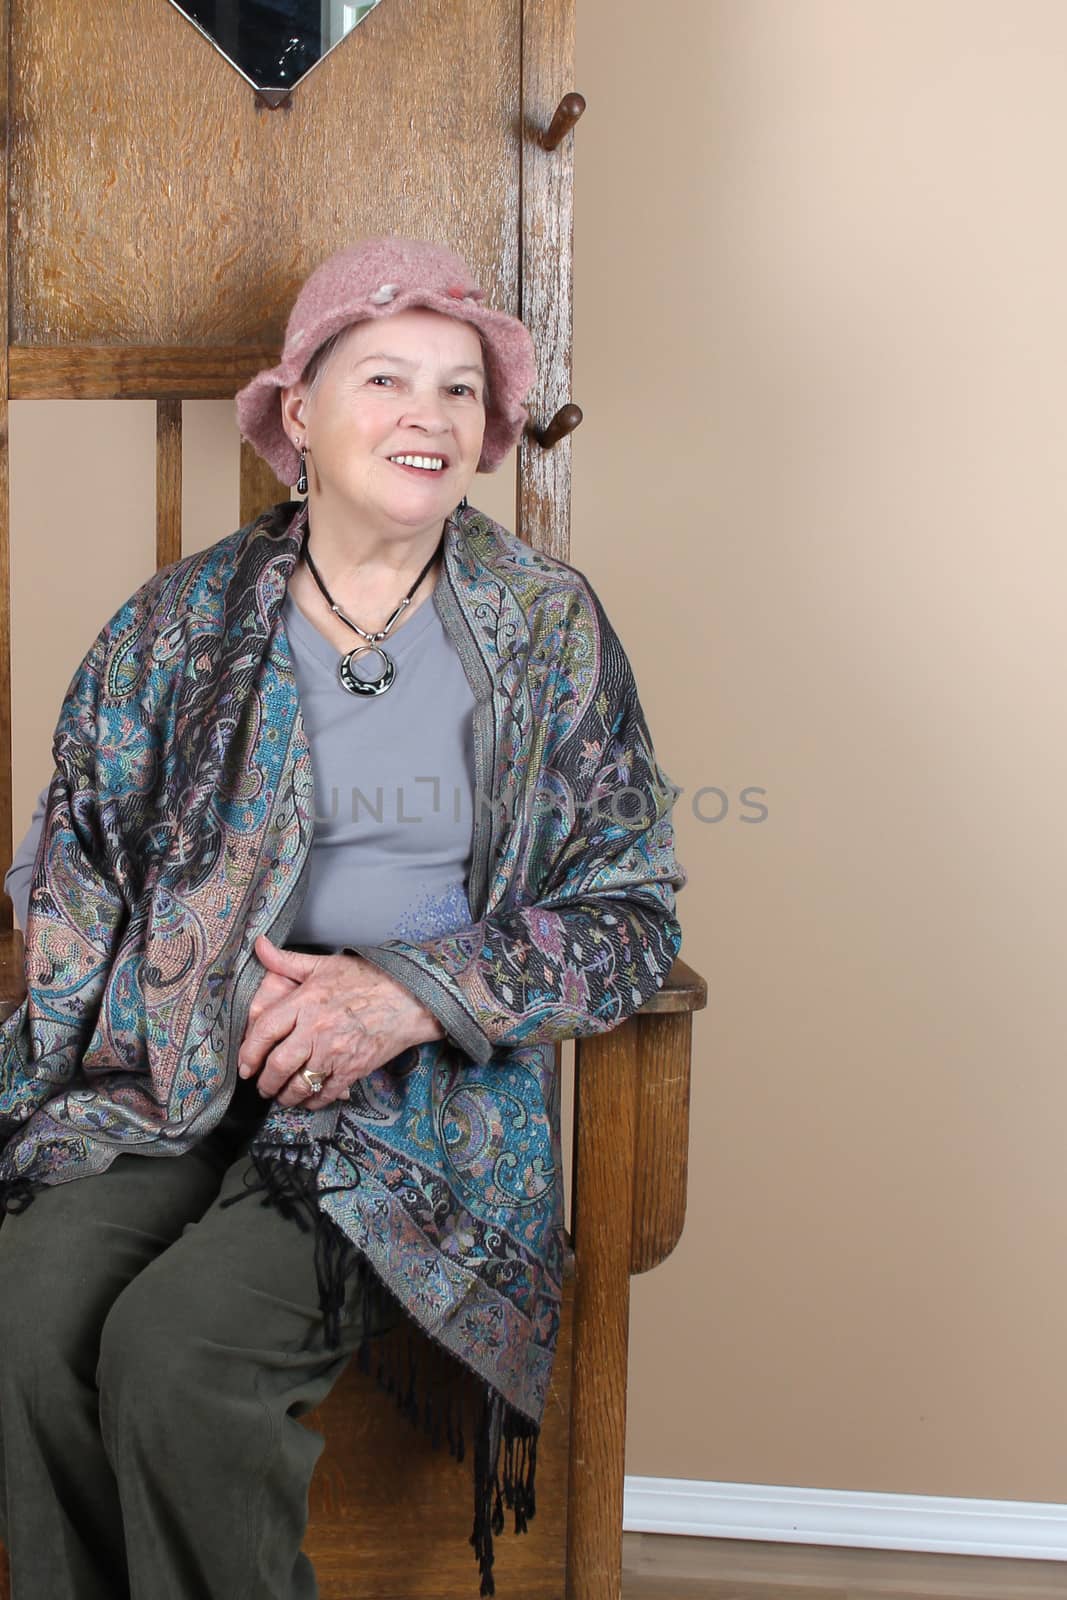 Senior lady wearing a pink hat in studio setting